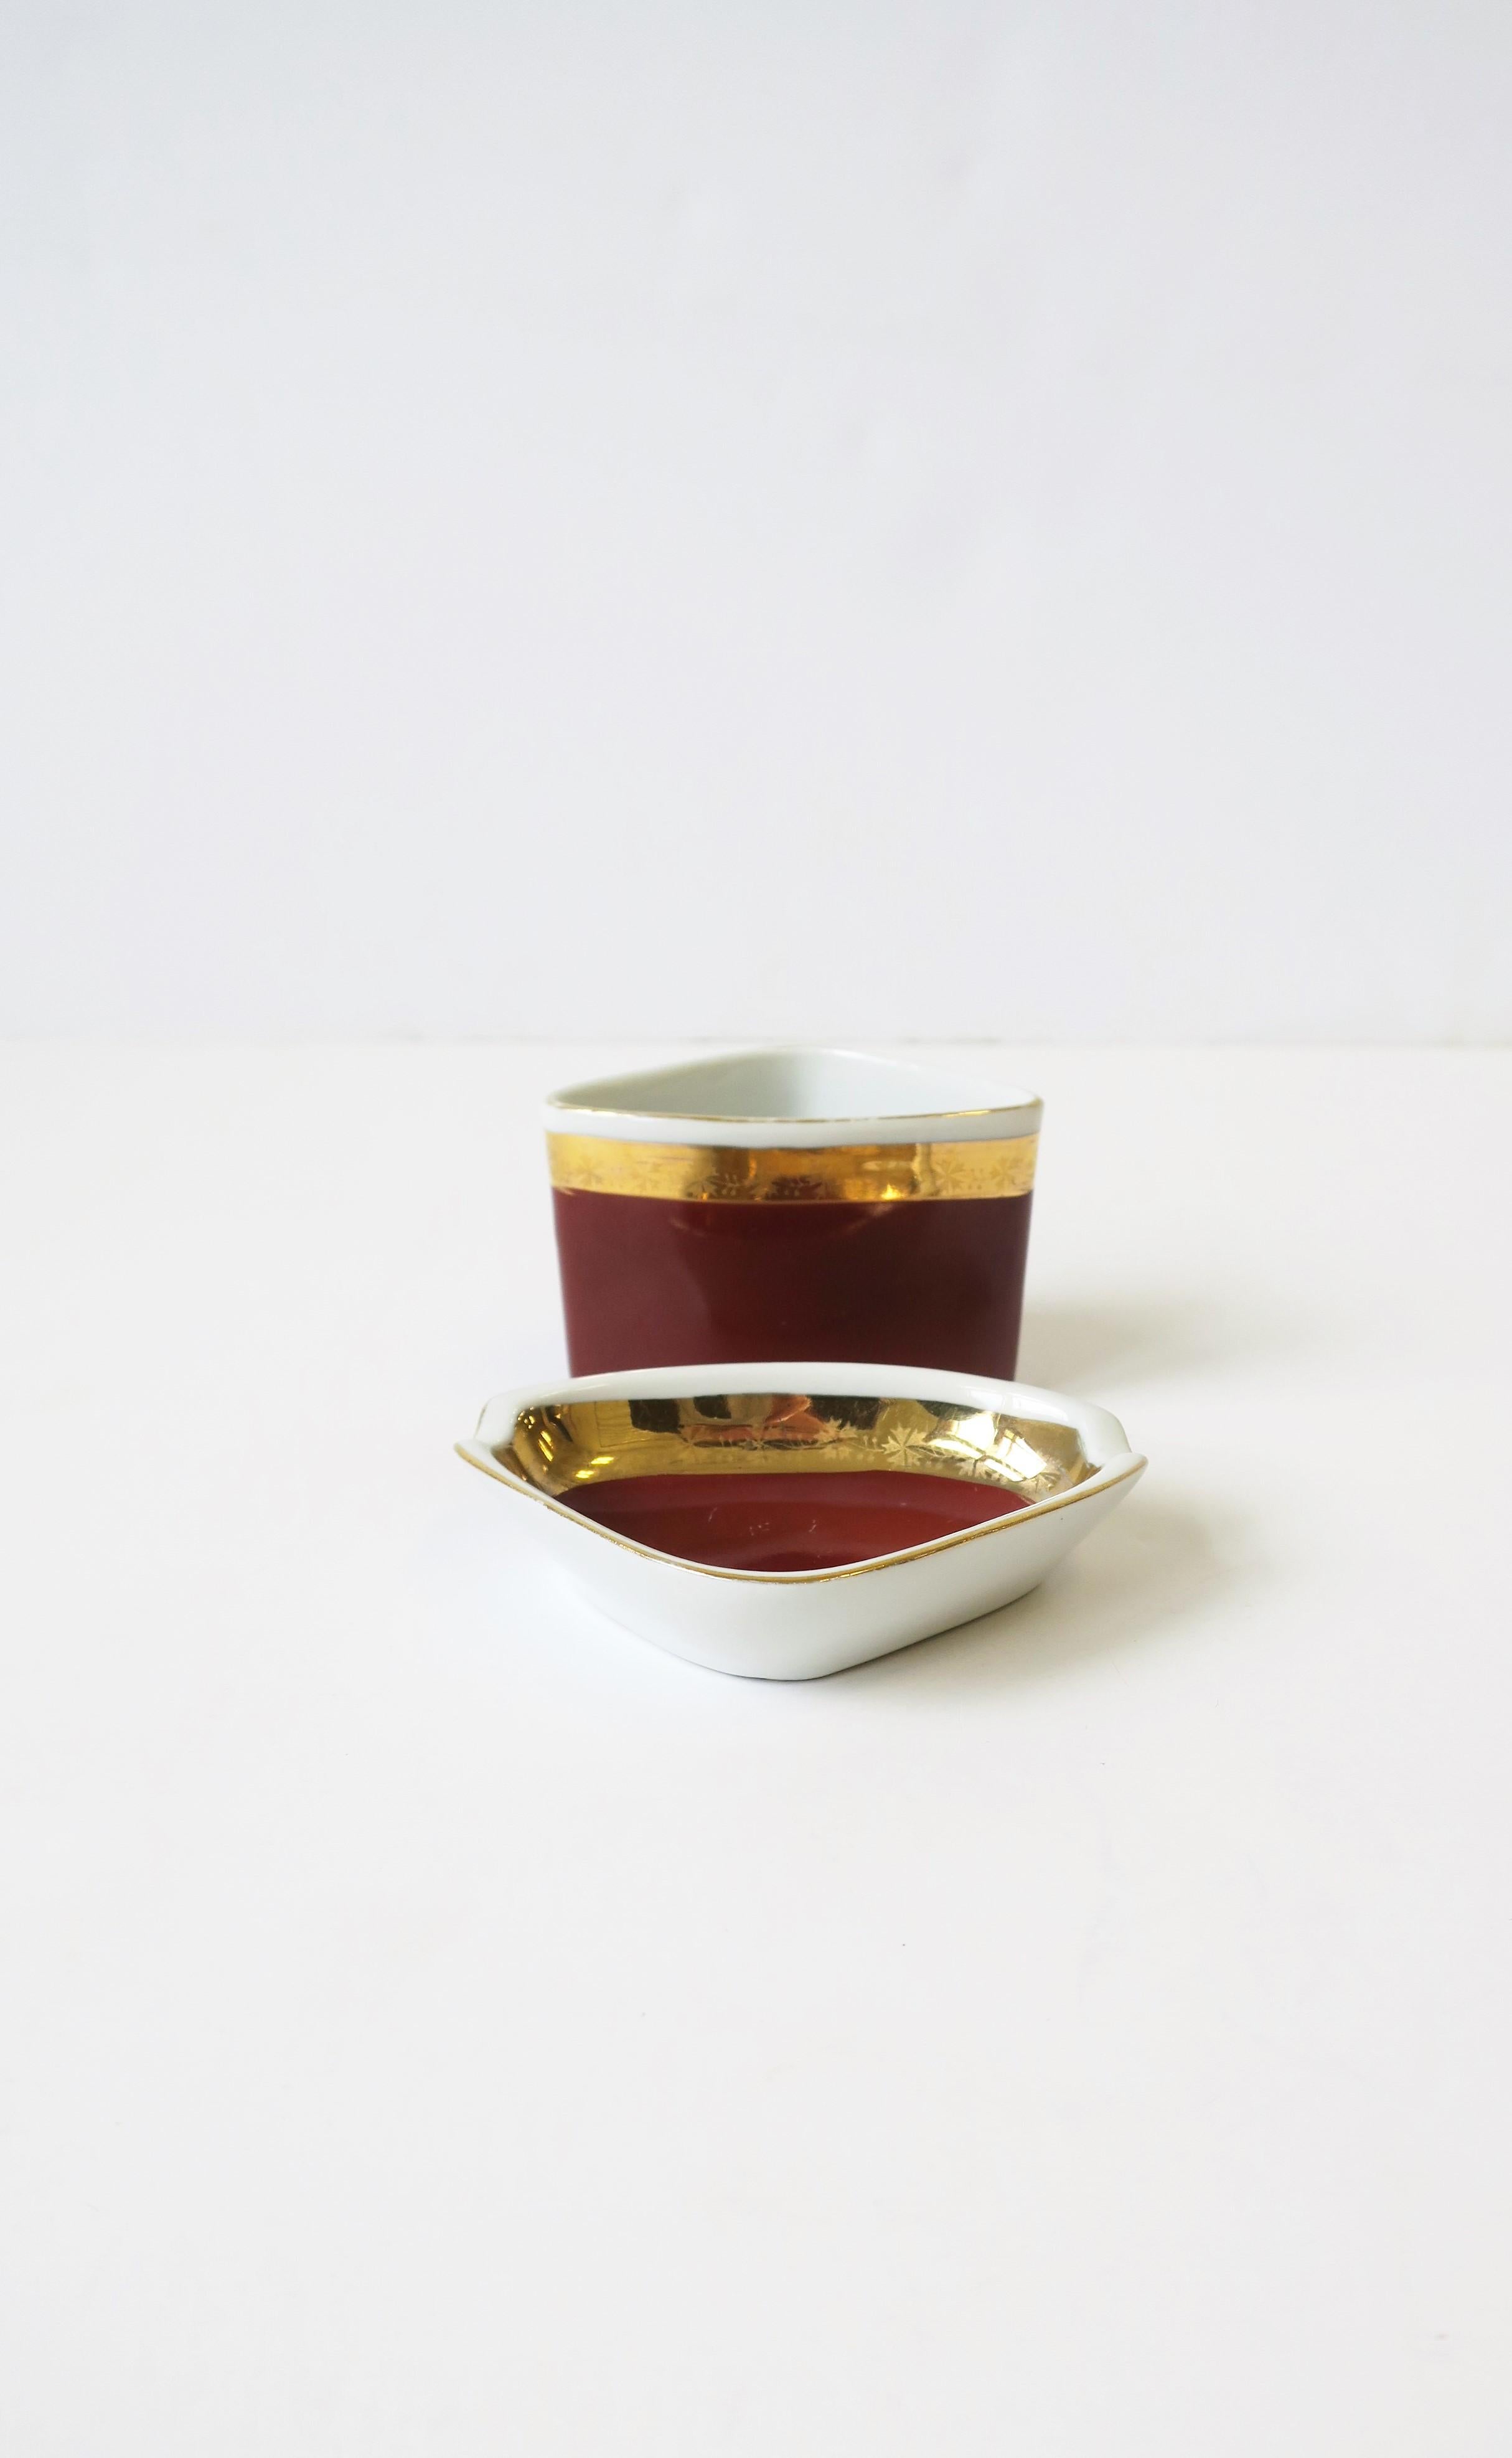 Hungarian Midcentury Modern Porcelain Ashtray and Cigarette Holder Set from Hungary For Sale